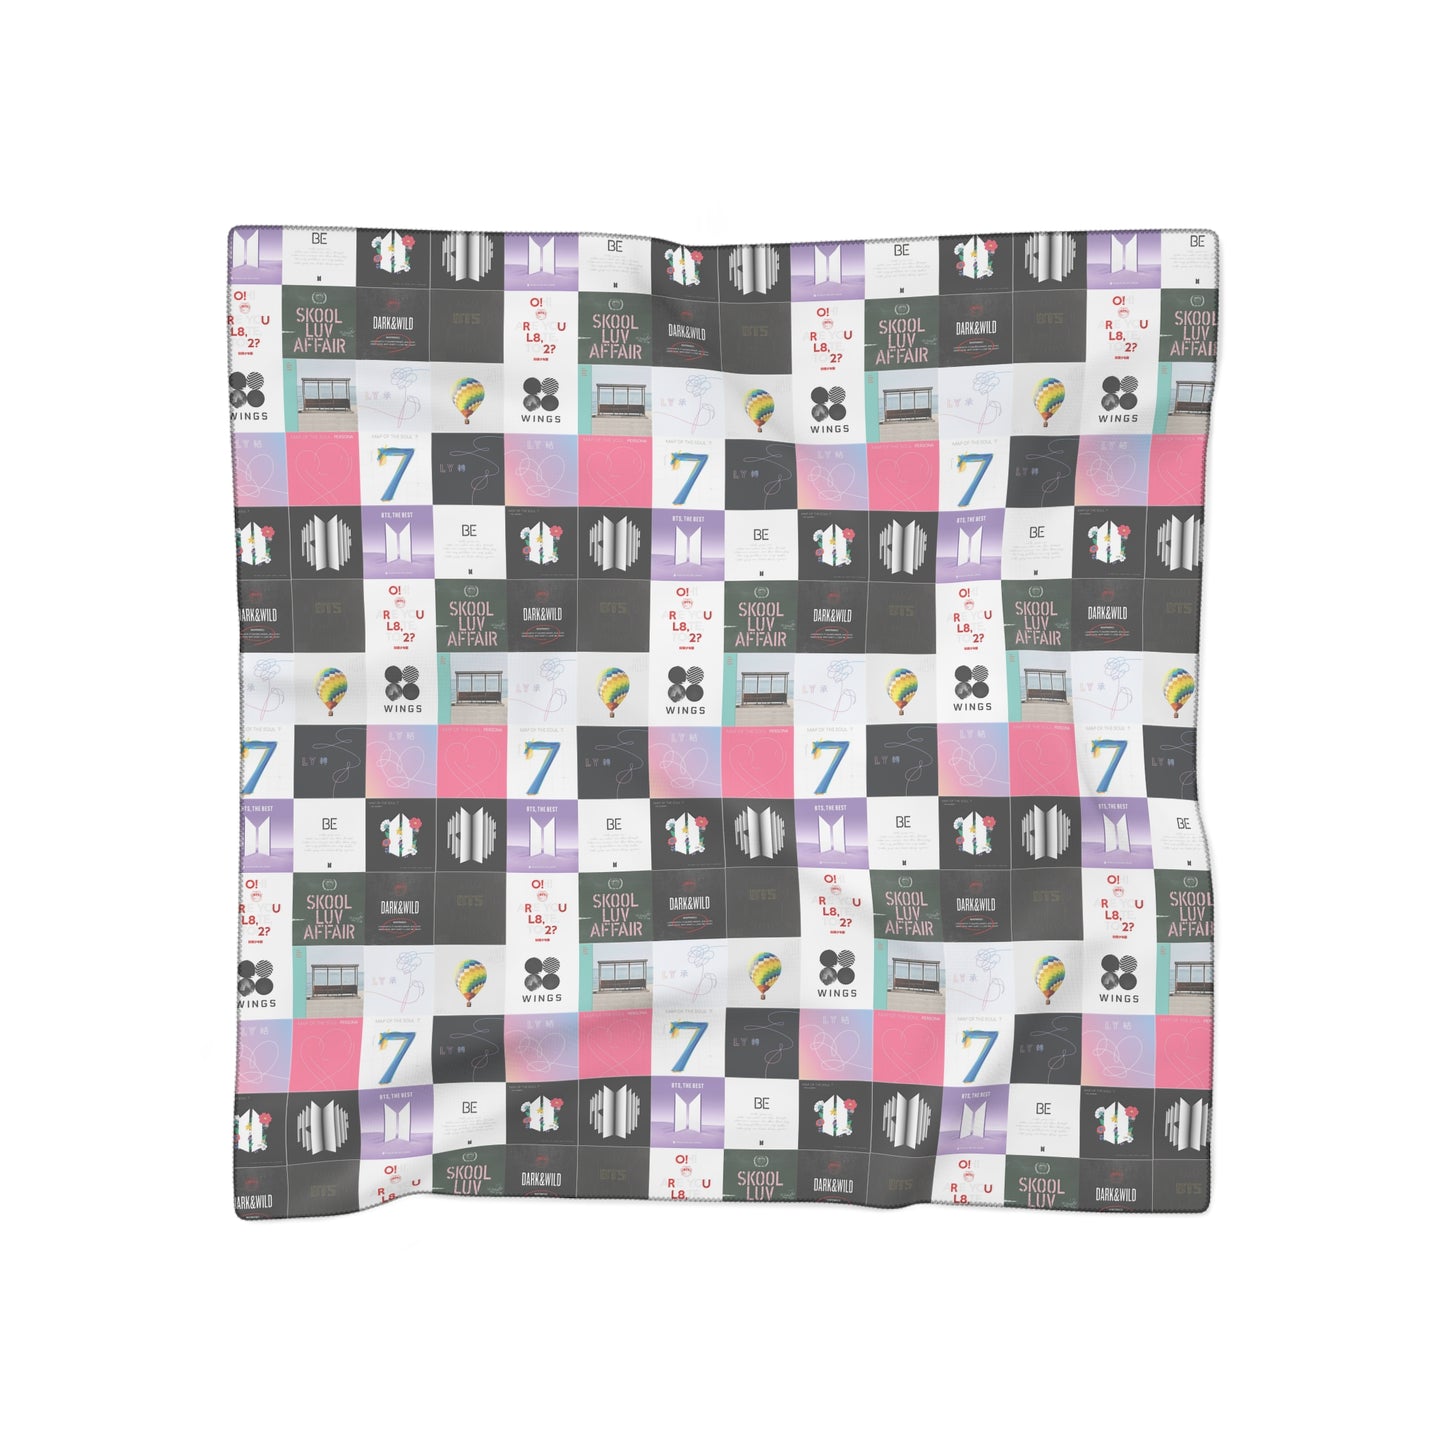 BTS Album Cover Art Collage Polyester Scarf